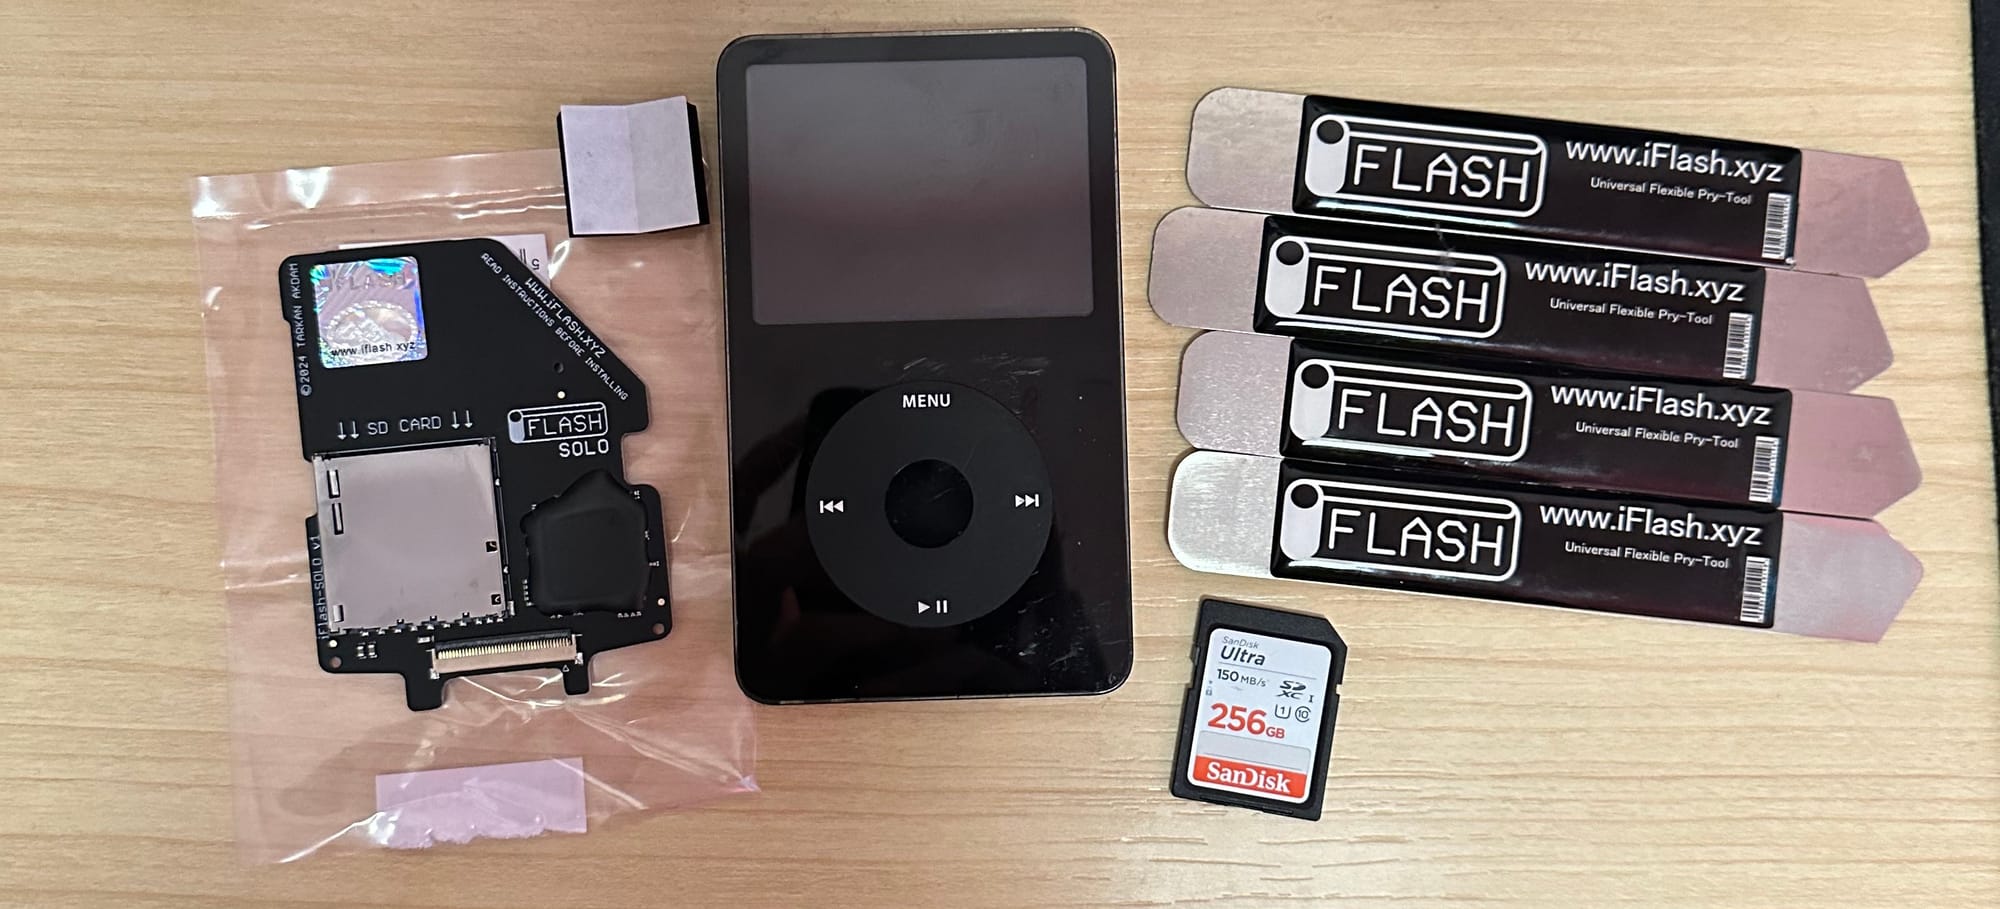 Photo of iPod, opening tools, and iFlash Board, SD Card.